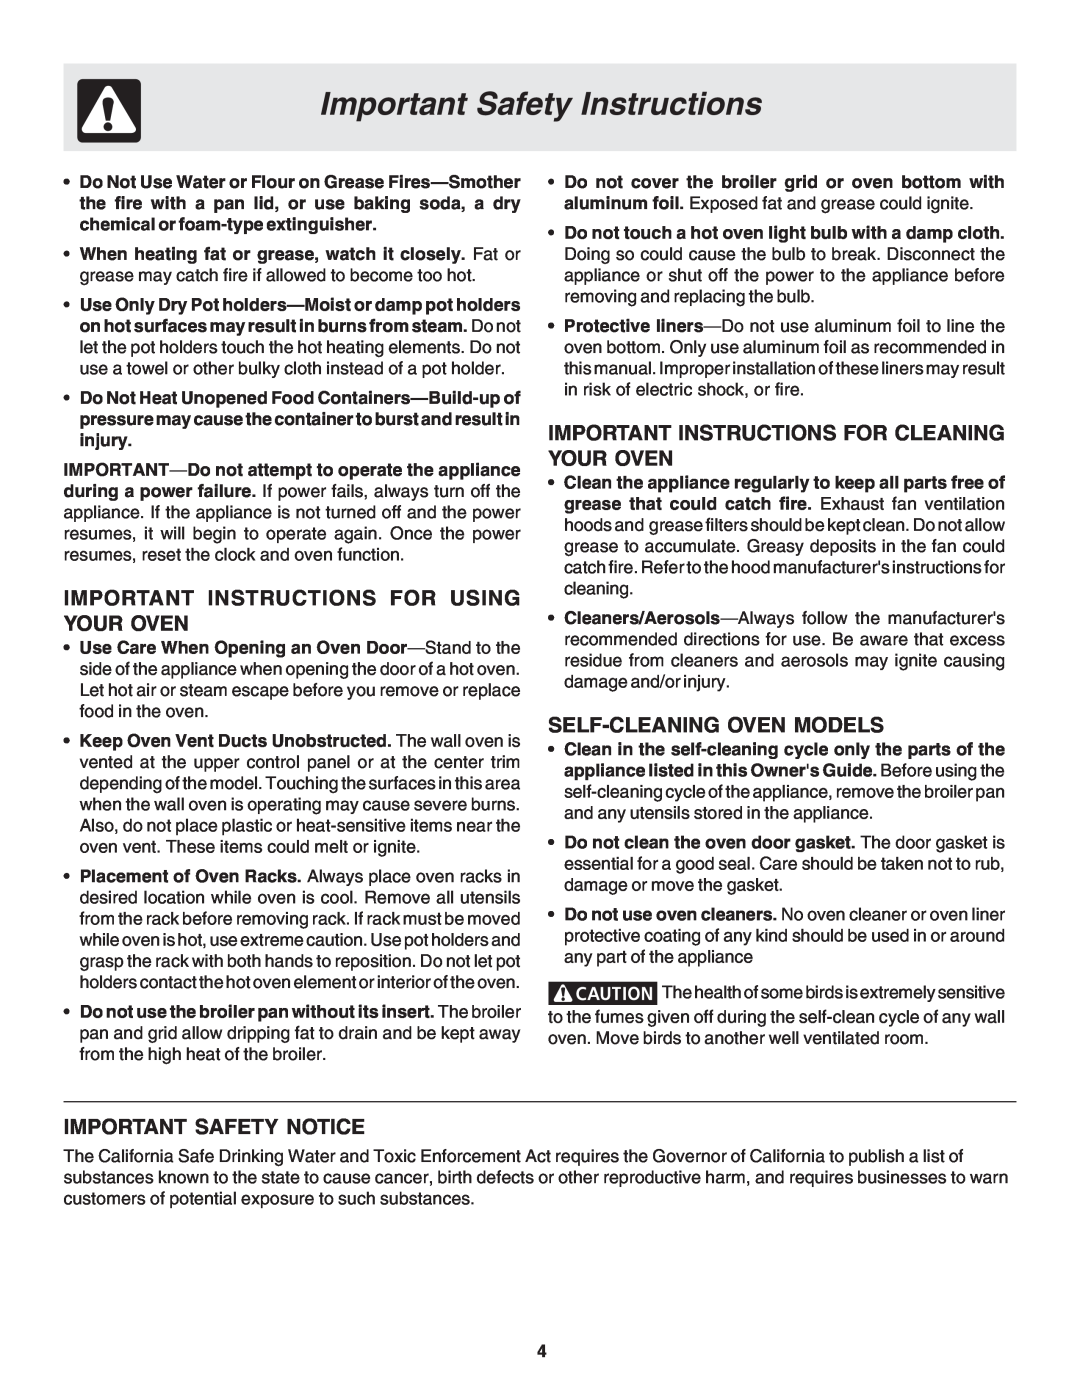 Frigidaire 318200943 warranty Important Instructions For Using Your Oven, Important Instructions For Cleaning Your Oven 